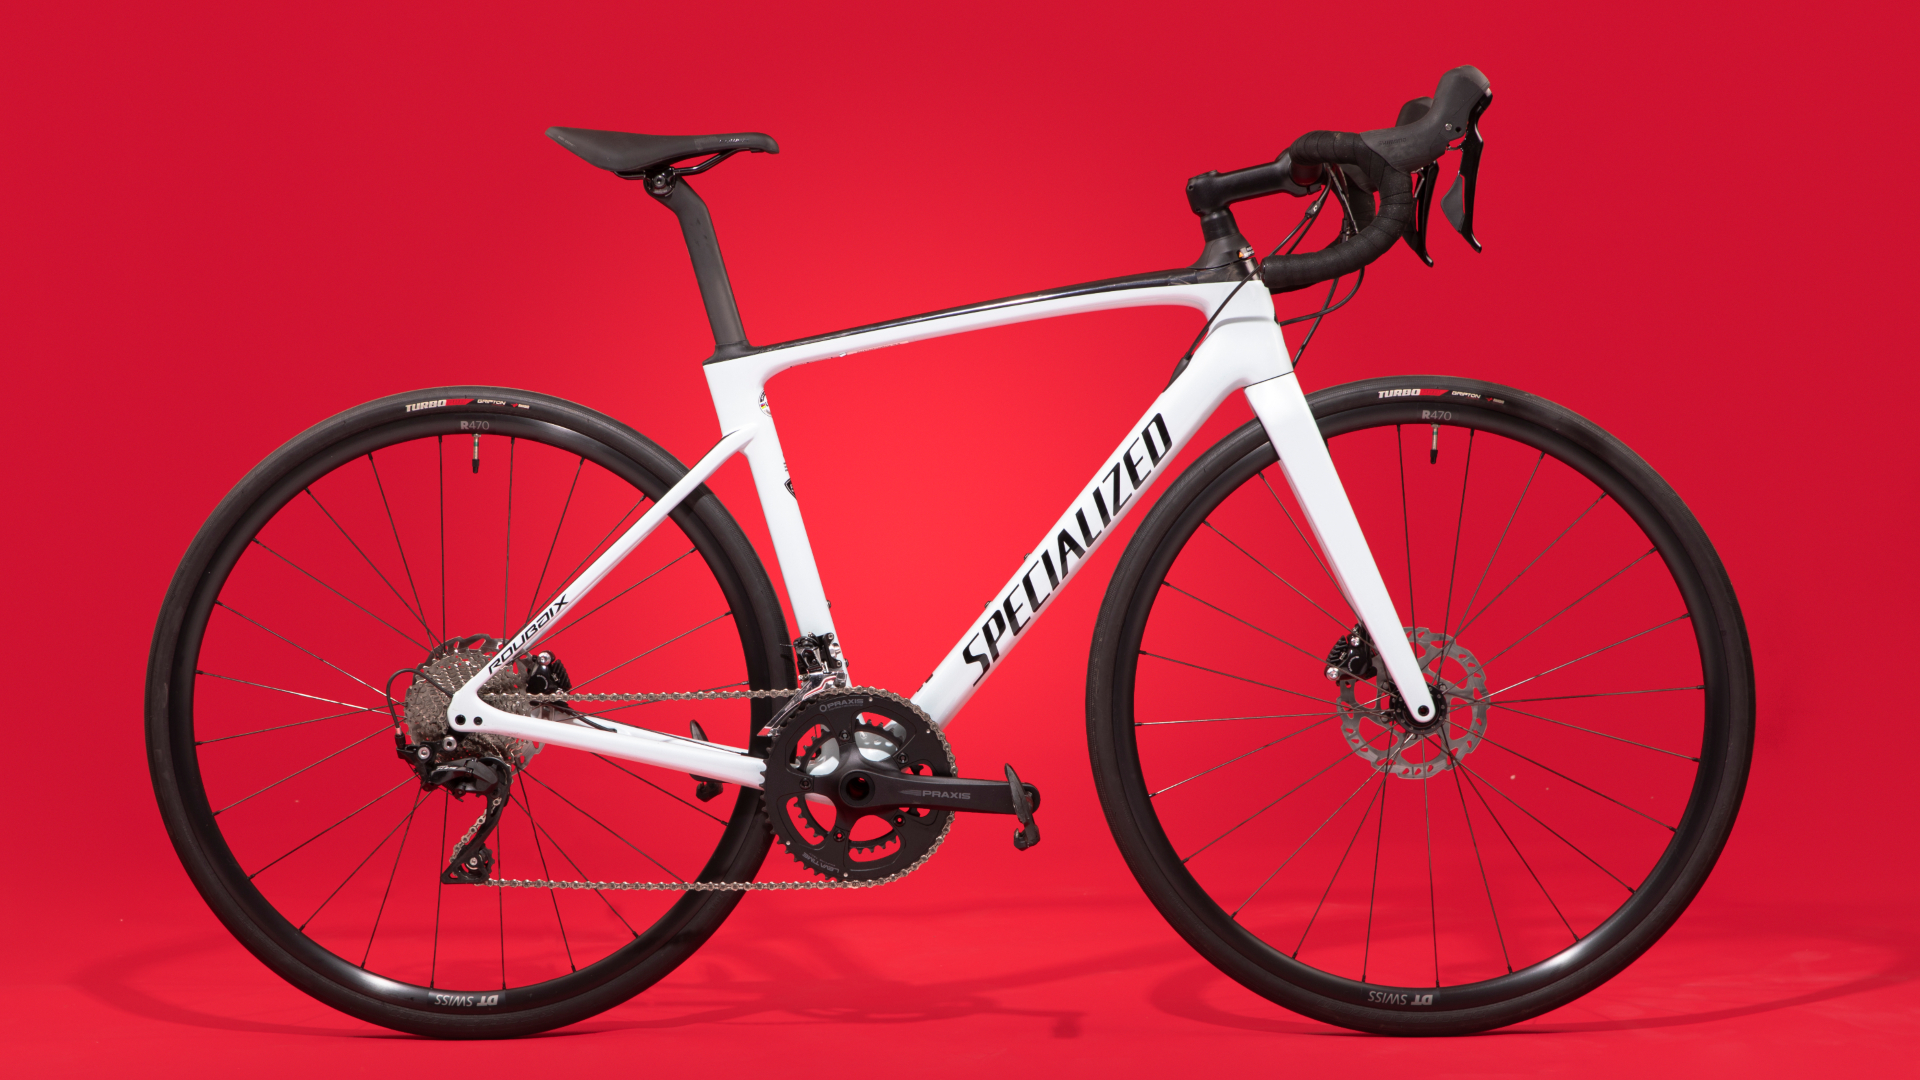 Specialized Roubaix Mudguards | peacecommission.kdsg.gov.ng